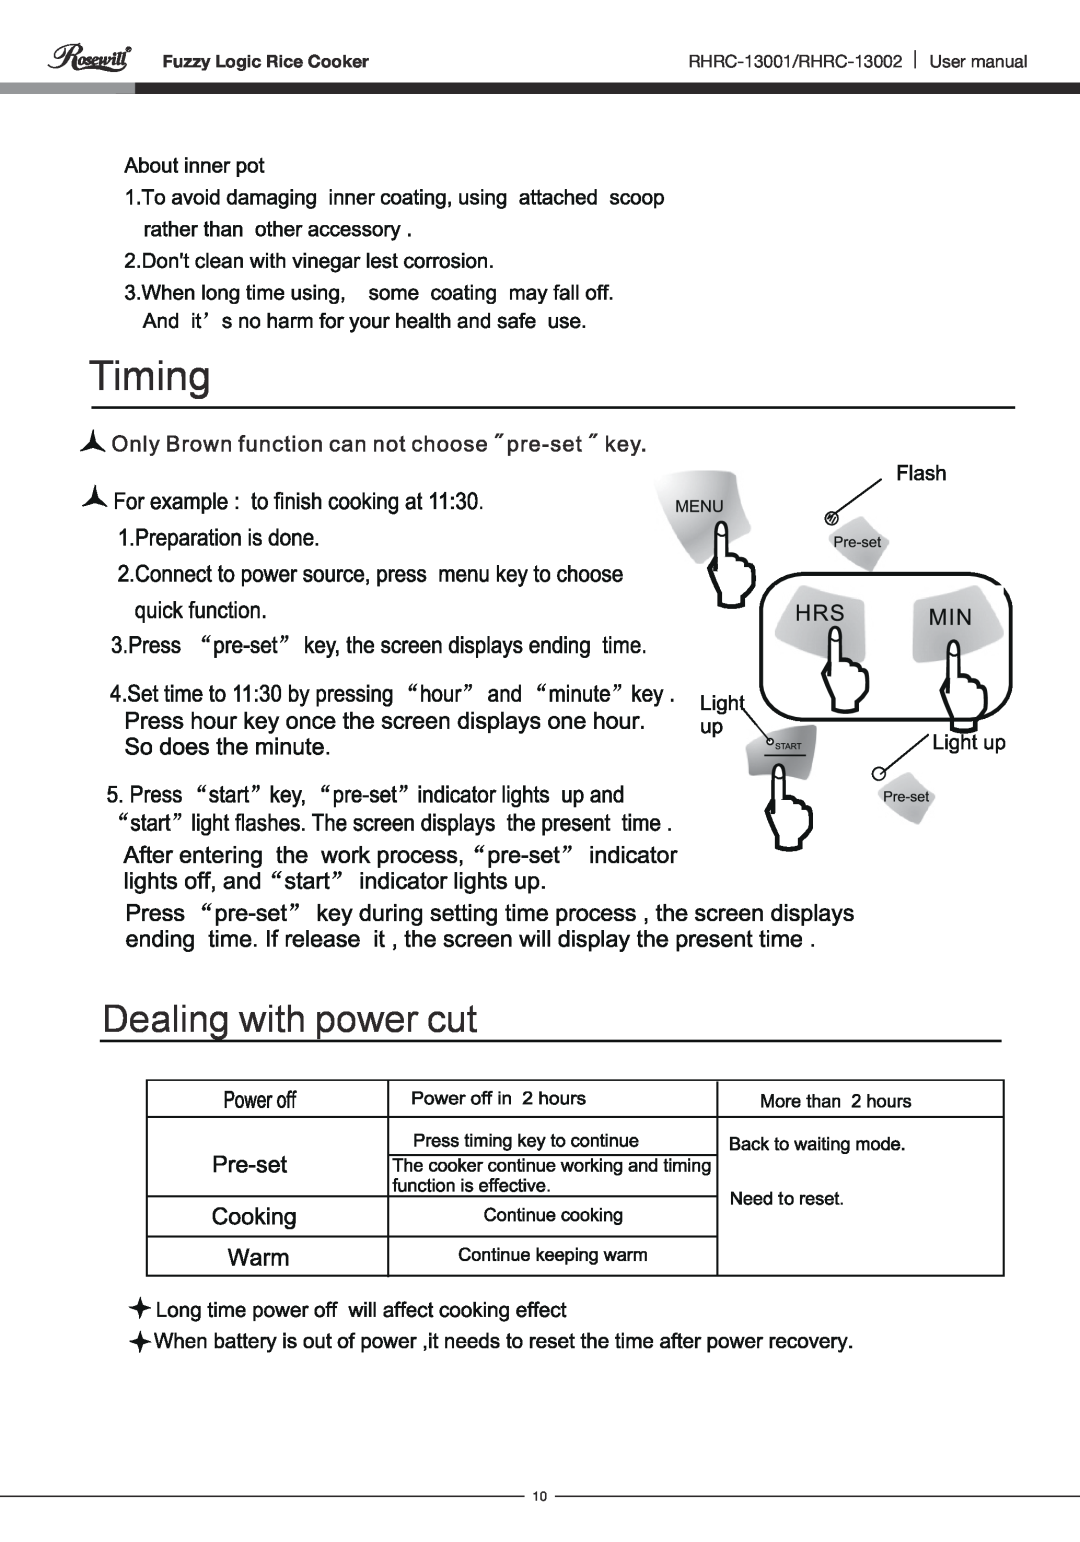 Rosewill user manual Dealing with power cut, Timing, Fuzzy Logic Rice Cooker, RHRC-13001/RHRC-13002 